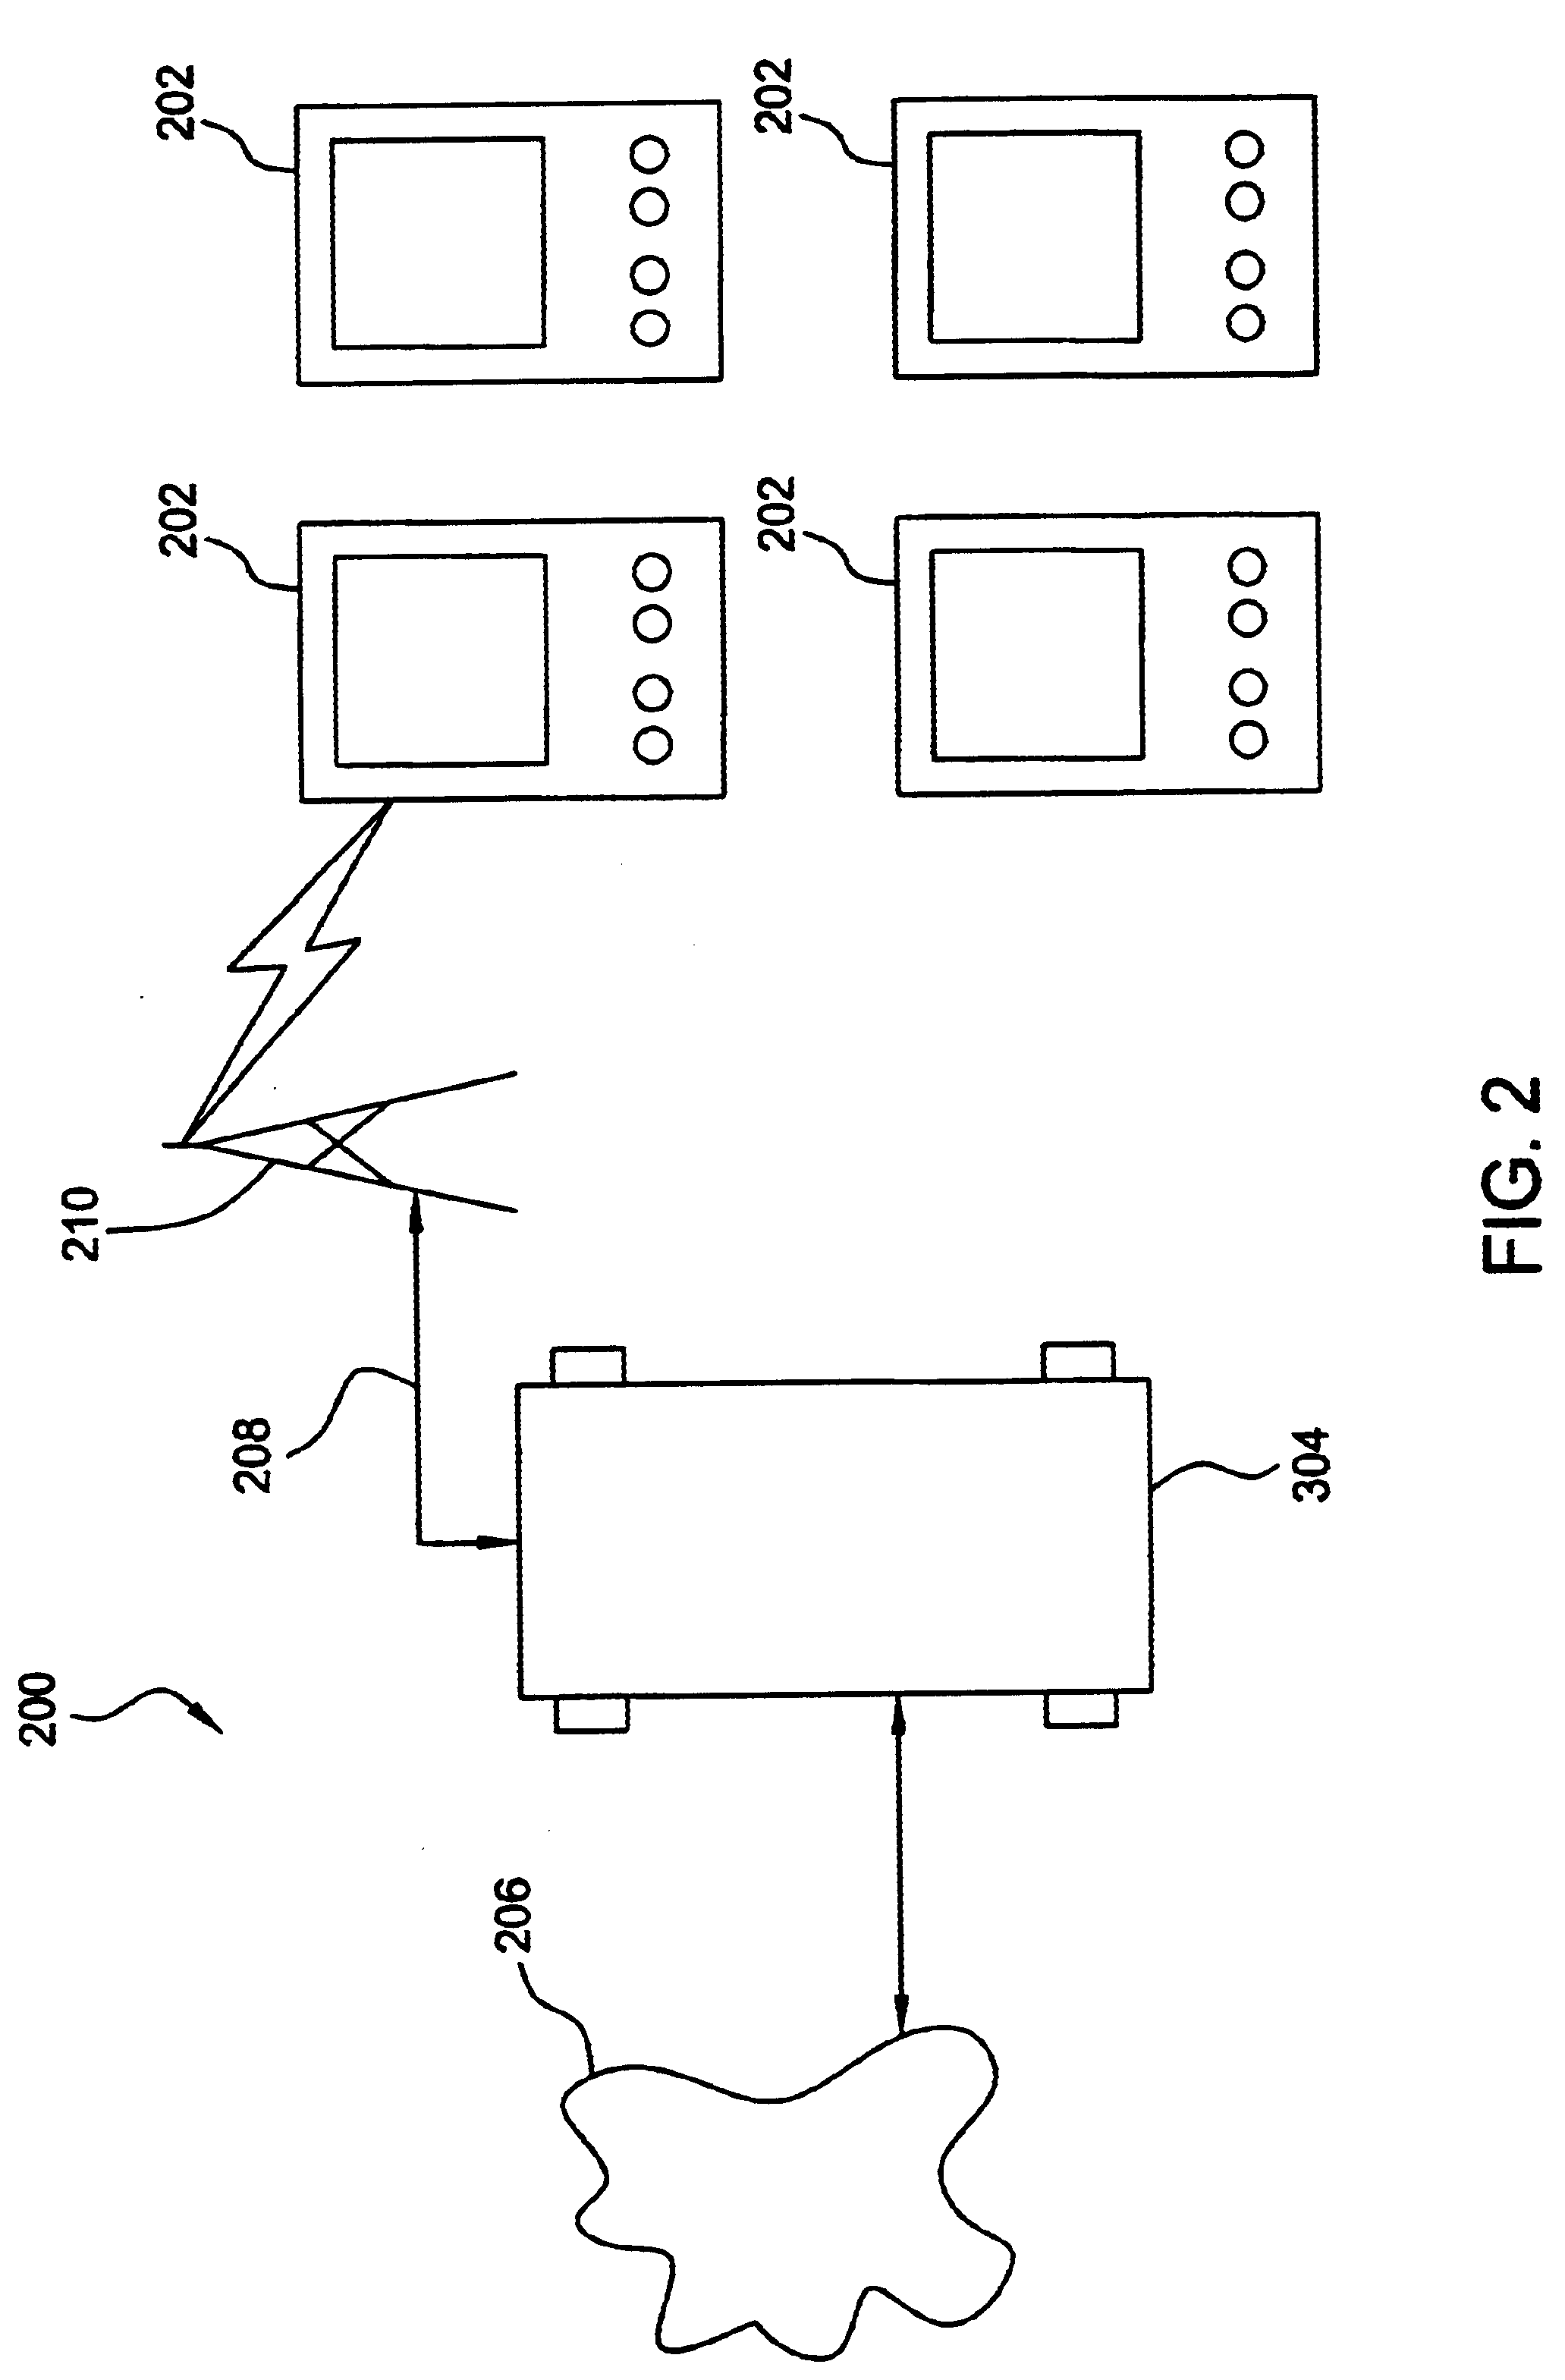 System, method and computer program product for rapidly posing relevant questions to a group leader in an educational environment using networked thin client devices